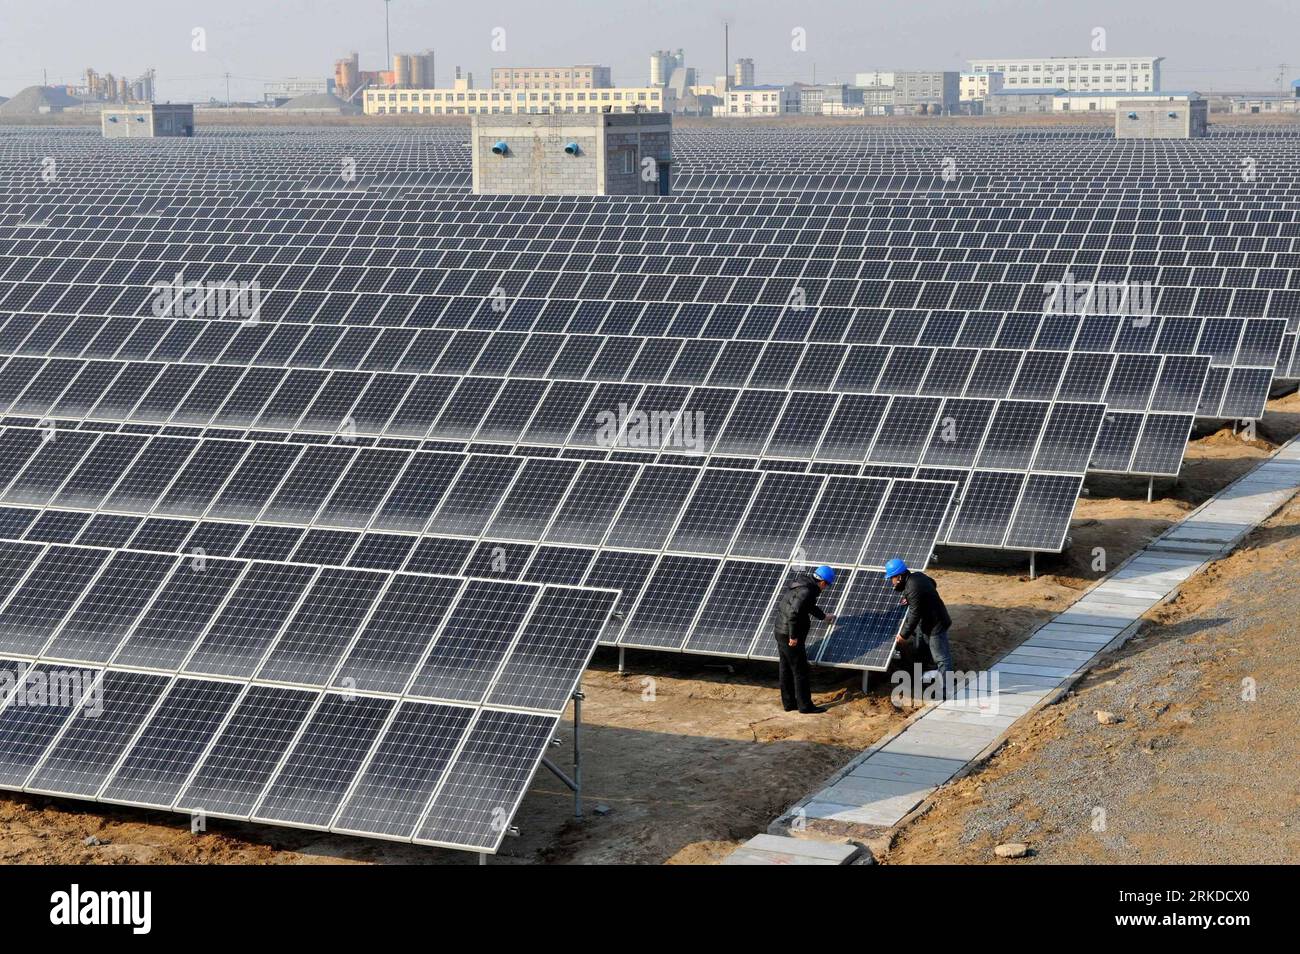 Bildnummer: 54917131  Datum: 15.02.2011  Copyright: imago/Xinhua (110216) -- DONGYING, Feb. 16, 2011 (Xinhua) -- The photo taken on Feb. 15, 2011 shows a solar plant in Dongying, east China s Shandong Province. The 7-megawatt photovoltaic plant has generated 1.24 million kilowatt hours of electricity since its inception on Dec. 29, 2010. (Xinhua/Liu Wenzhong) (ljh) CHINA-SHANDONG-DONGYING-SOLAR PLANT (CN) PUBLICATIONxNOTxINxCHN Wirtschaft Energie Sonnenenergie kbdig xcb 2011 quer o0 Solaranlage, Photovoltaik, Sonnenkollektoren, Totale, Versorger    Bildnummer 54917131 Date 15 02 2011 Copyright Stock Photo